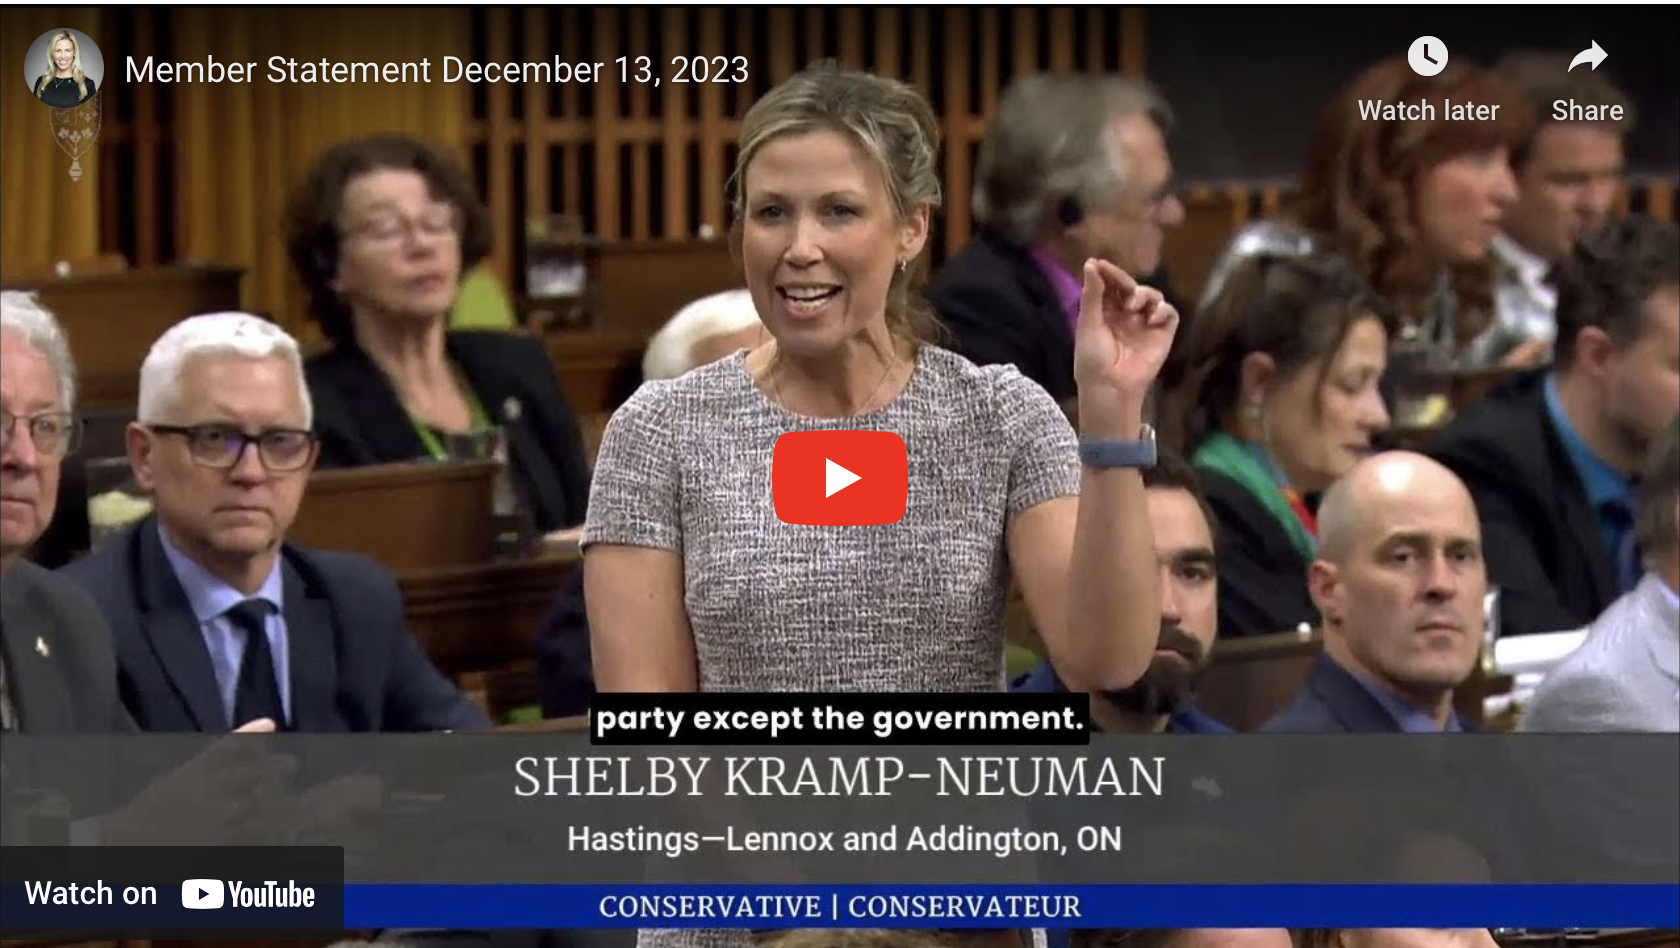 Shelby Kramp-Neuman giving a member statement in the House of Commons